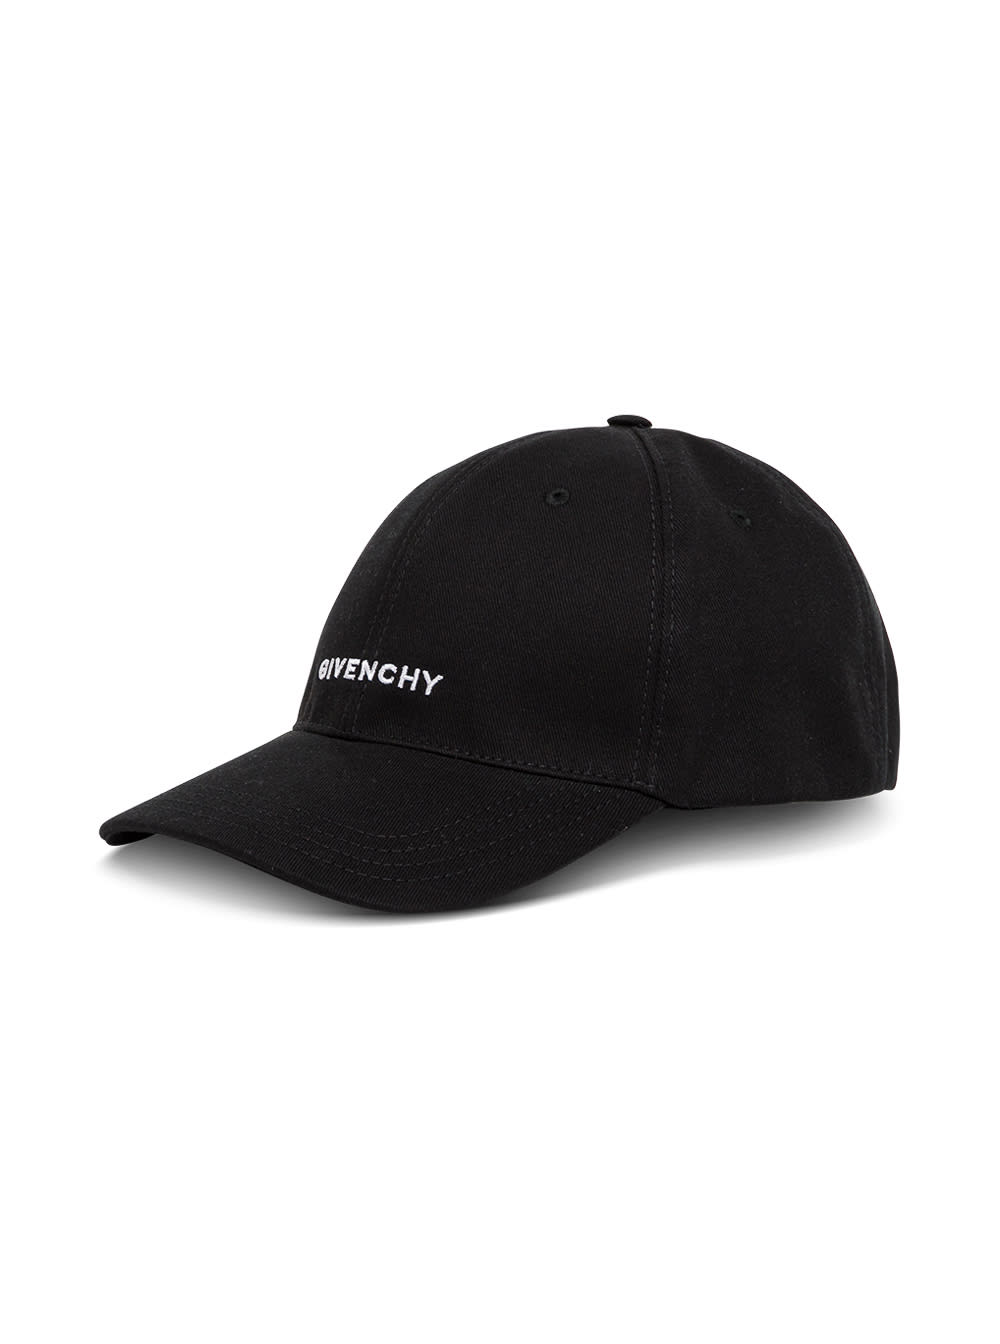 Givenchy Mans Black Cotton Blend Hat With Logo